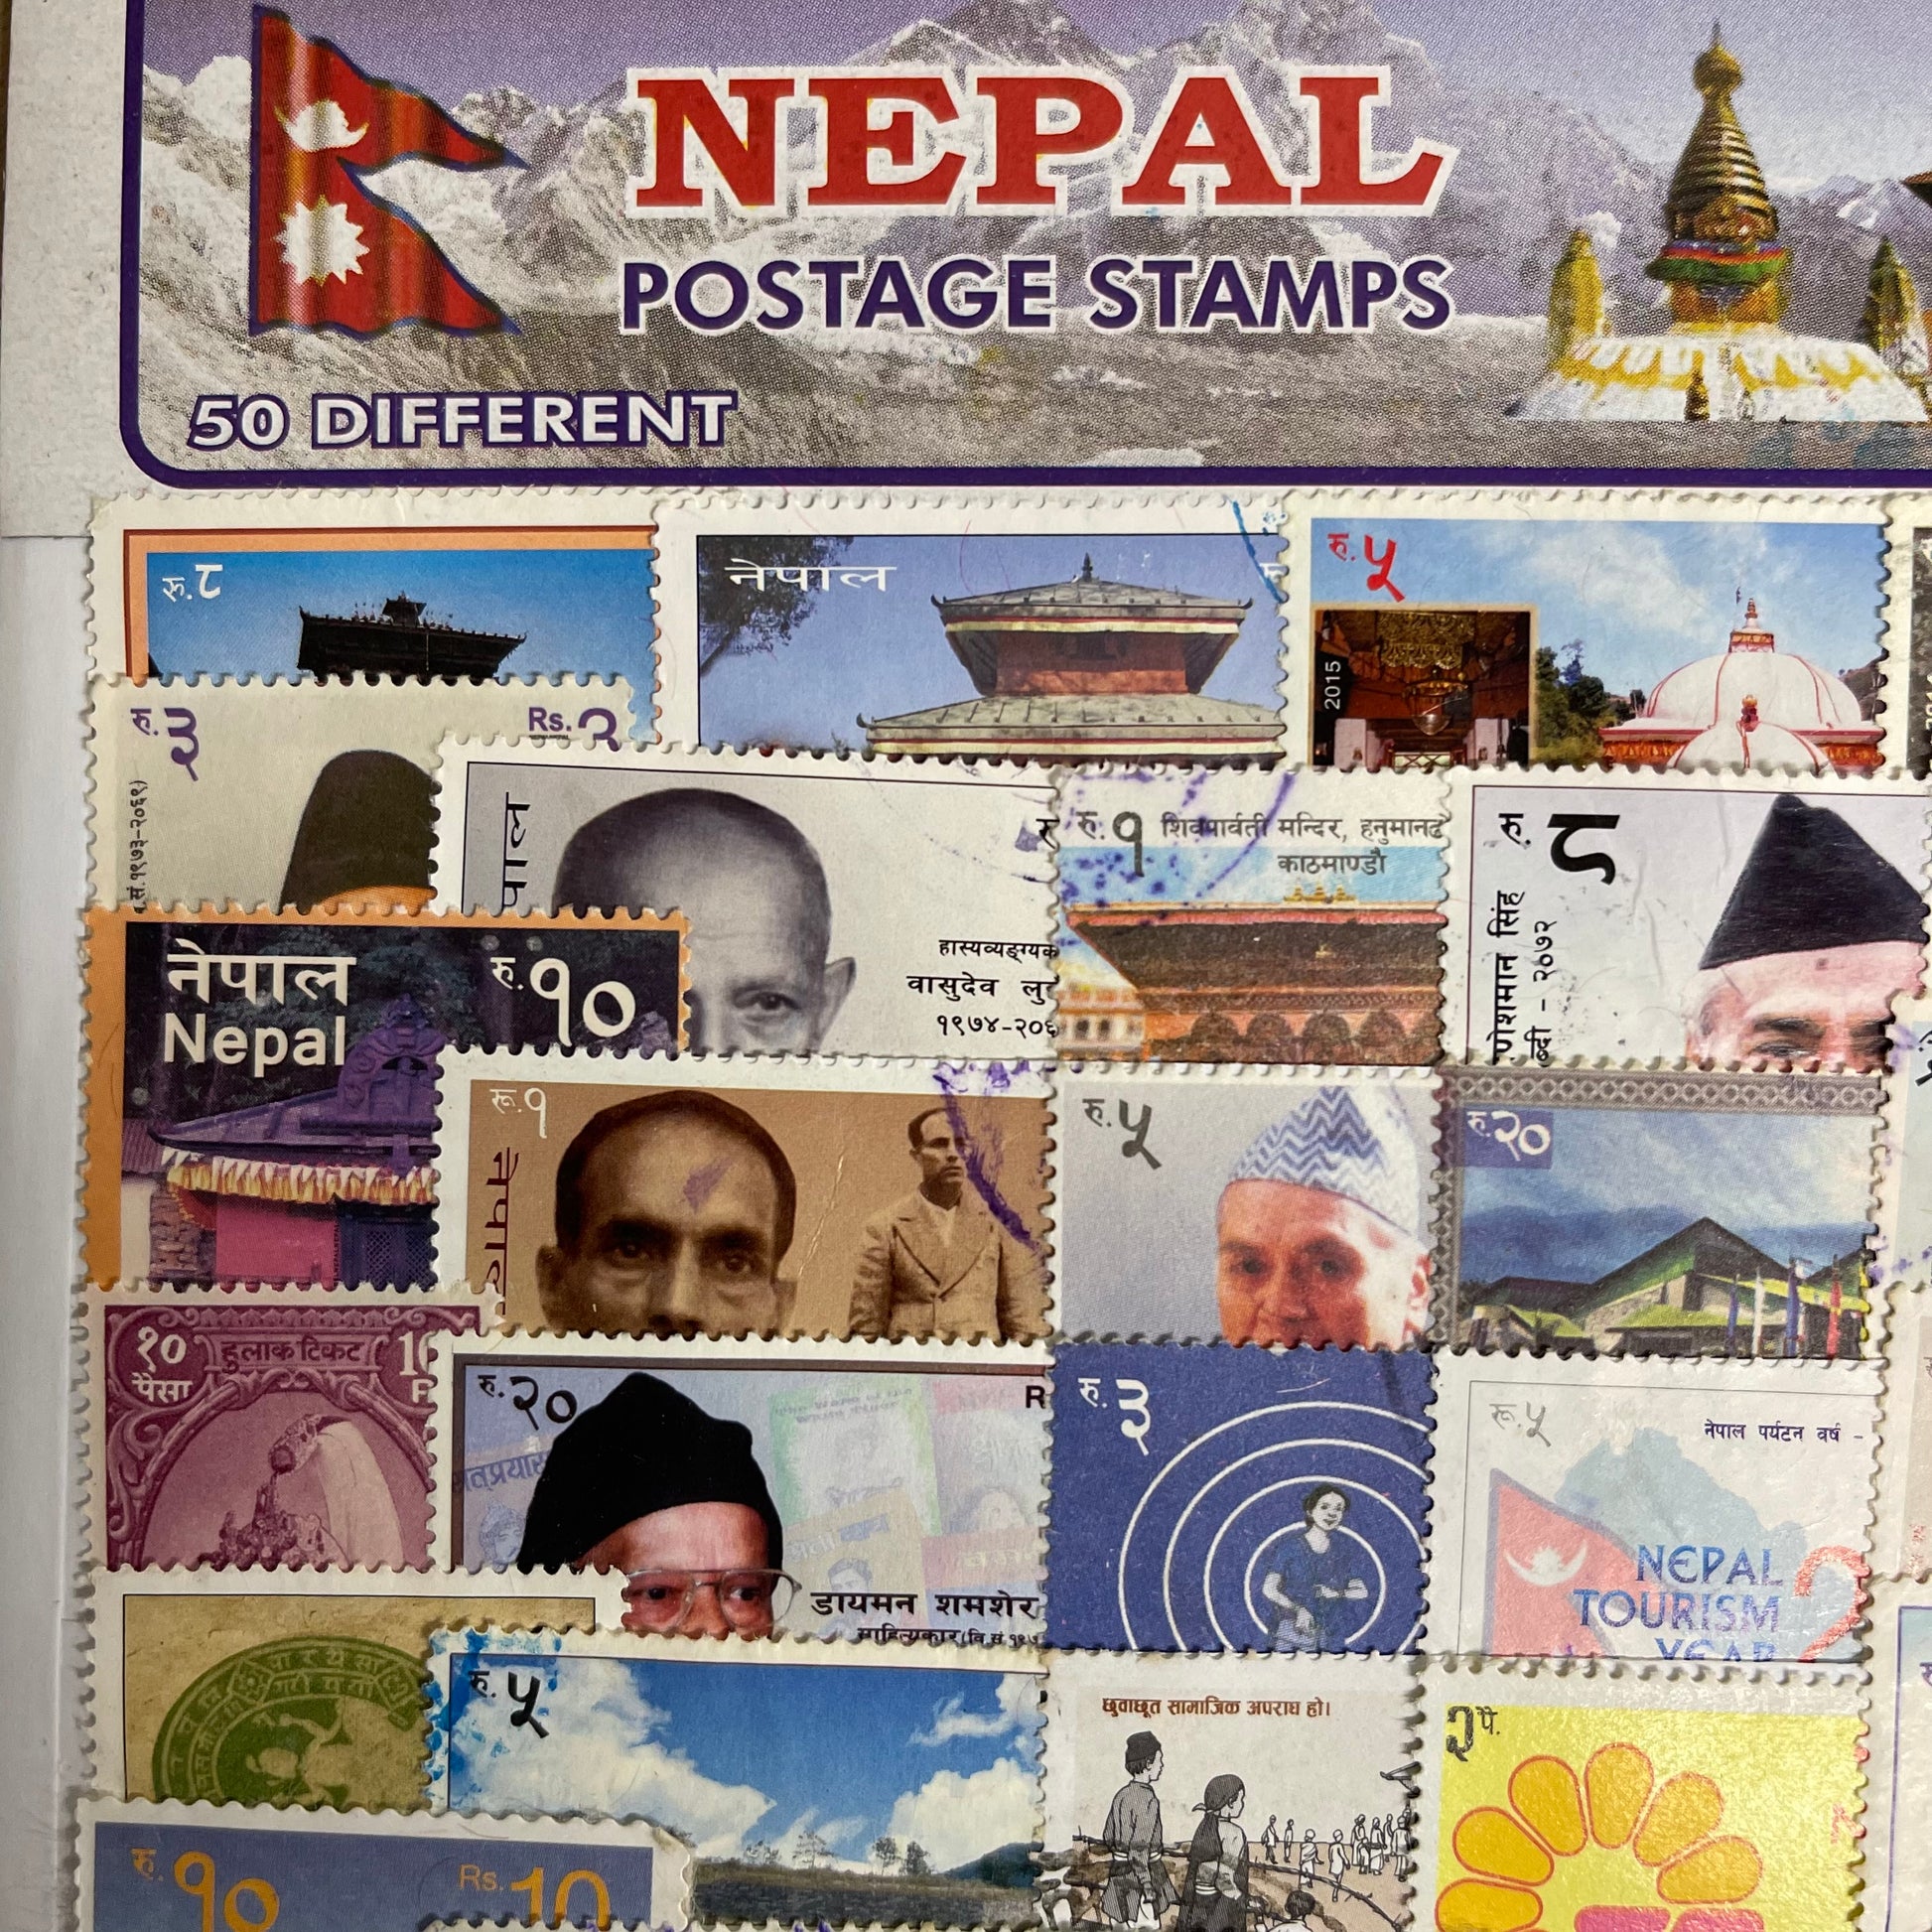 50 different Nepal postage stamps